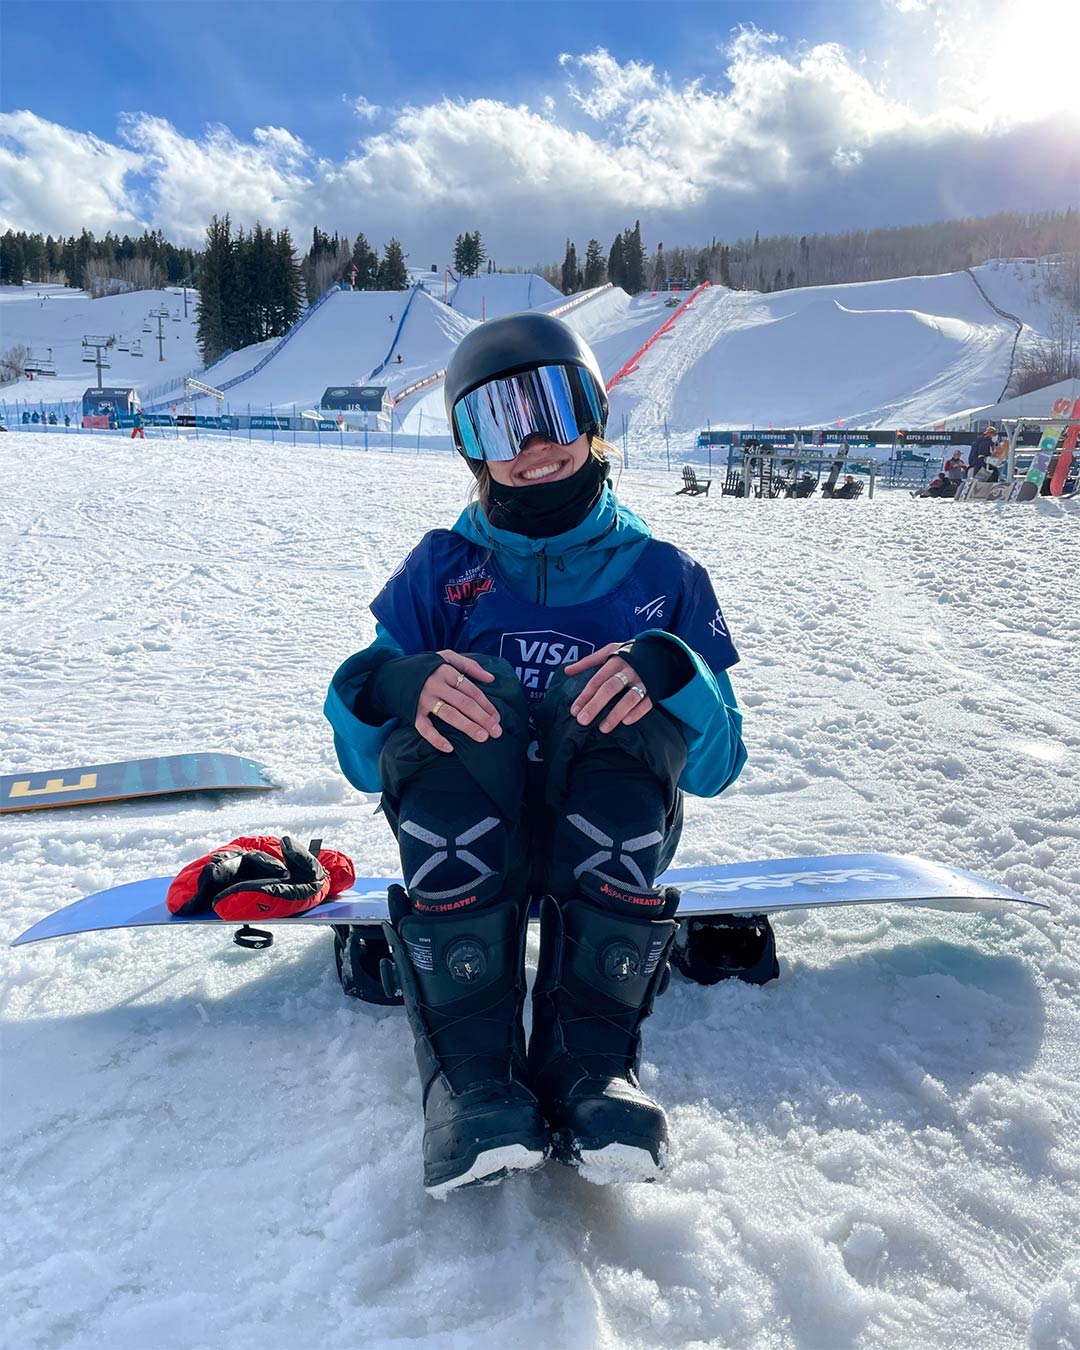 Loranne Smans sitting on a blue snowboard in front of the slopes.